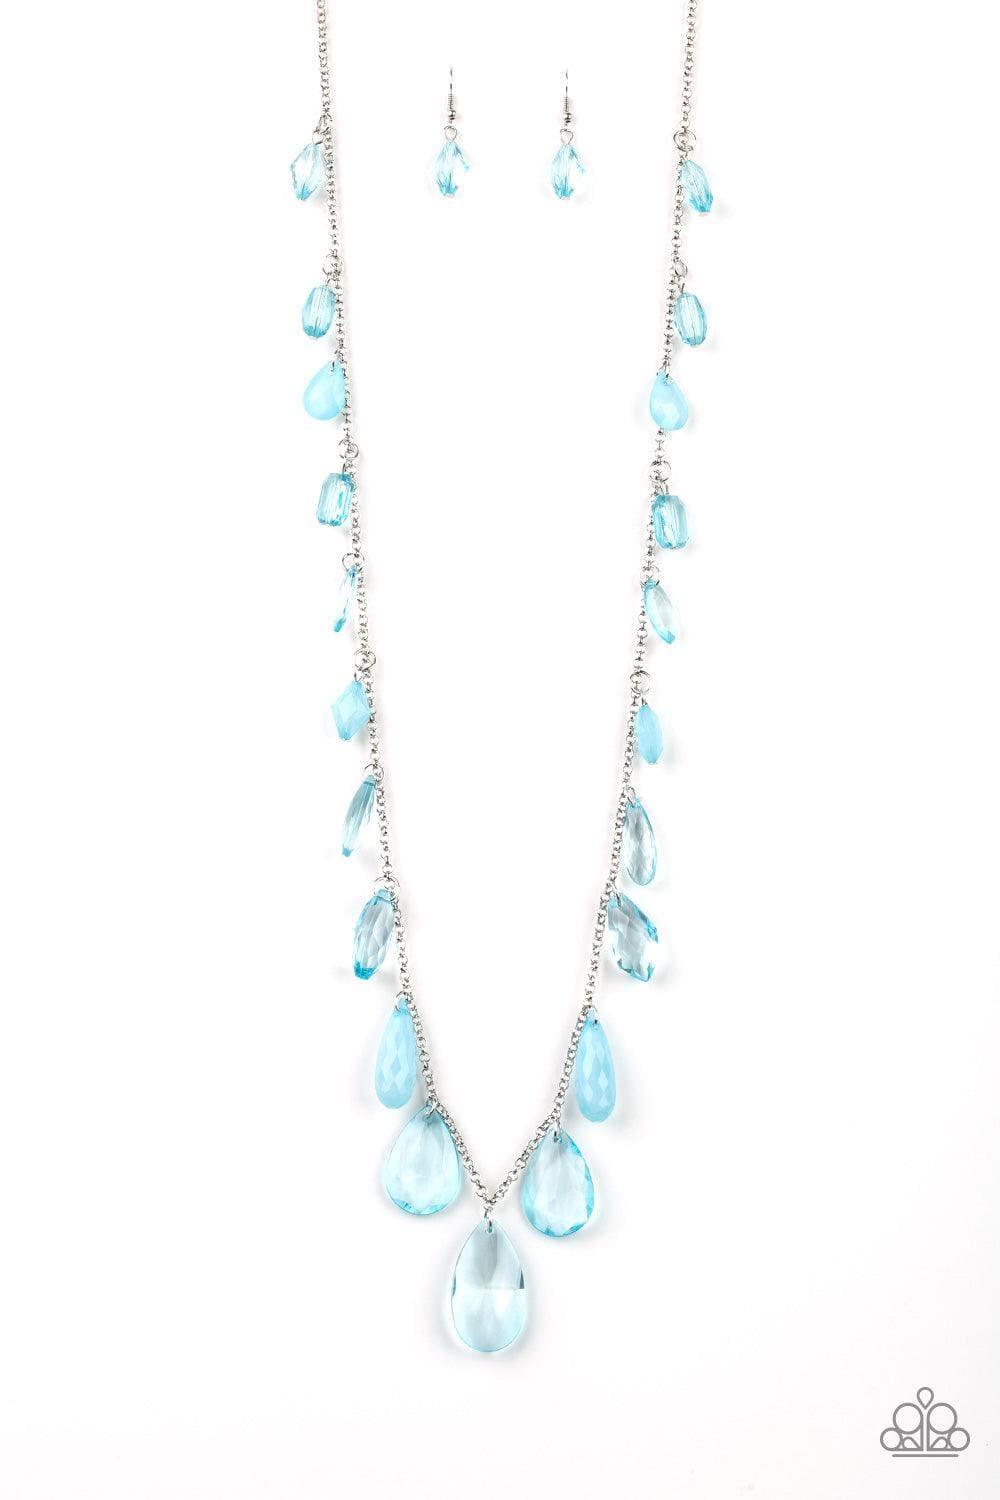 Paparazzi Accessories - Glow And Steady Wins The Race - Blue Necklace - Bling by JessieK